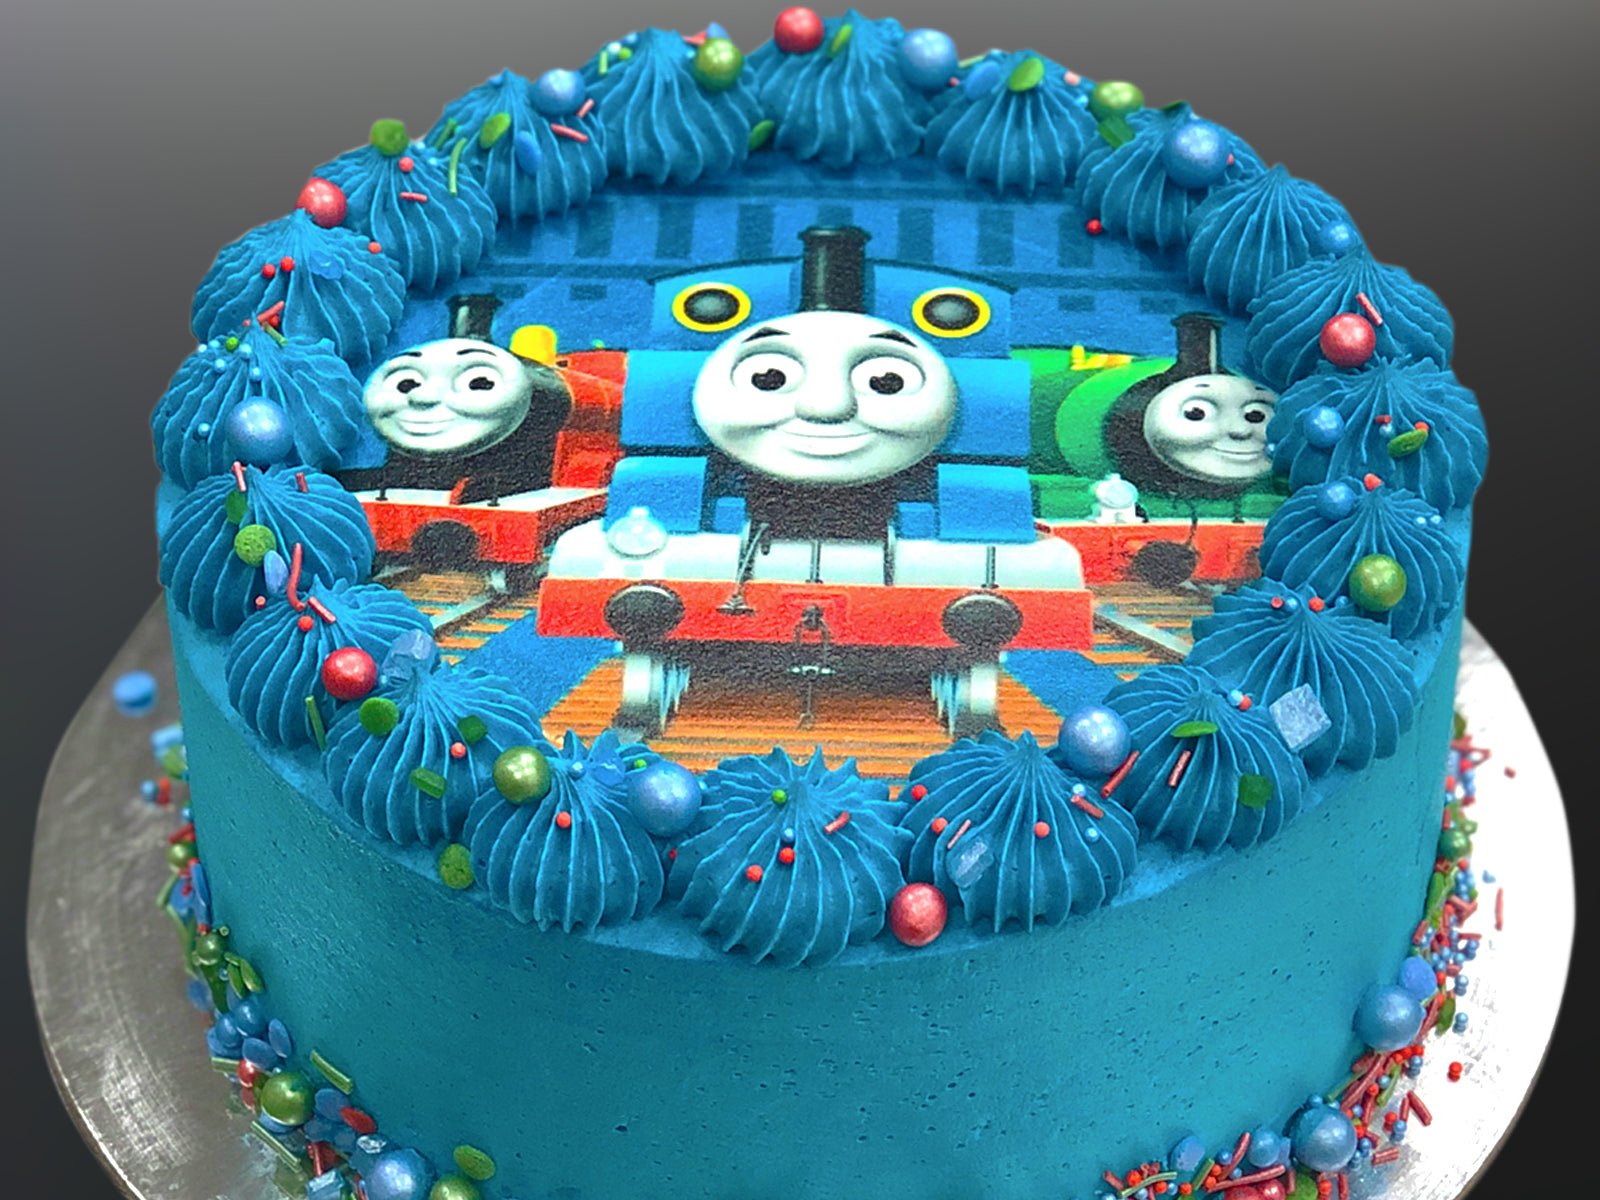 Cake of the Day! Thomas the... - Chocolate Rose Bakeshop | Facebook